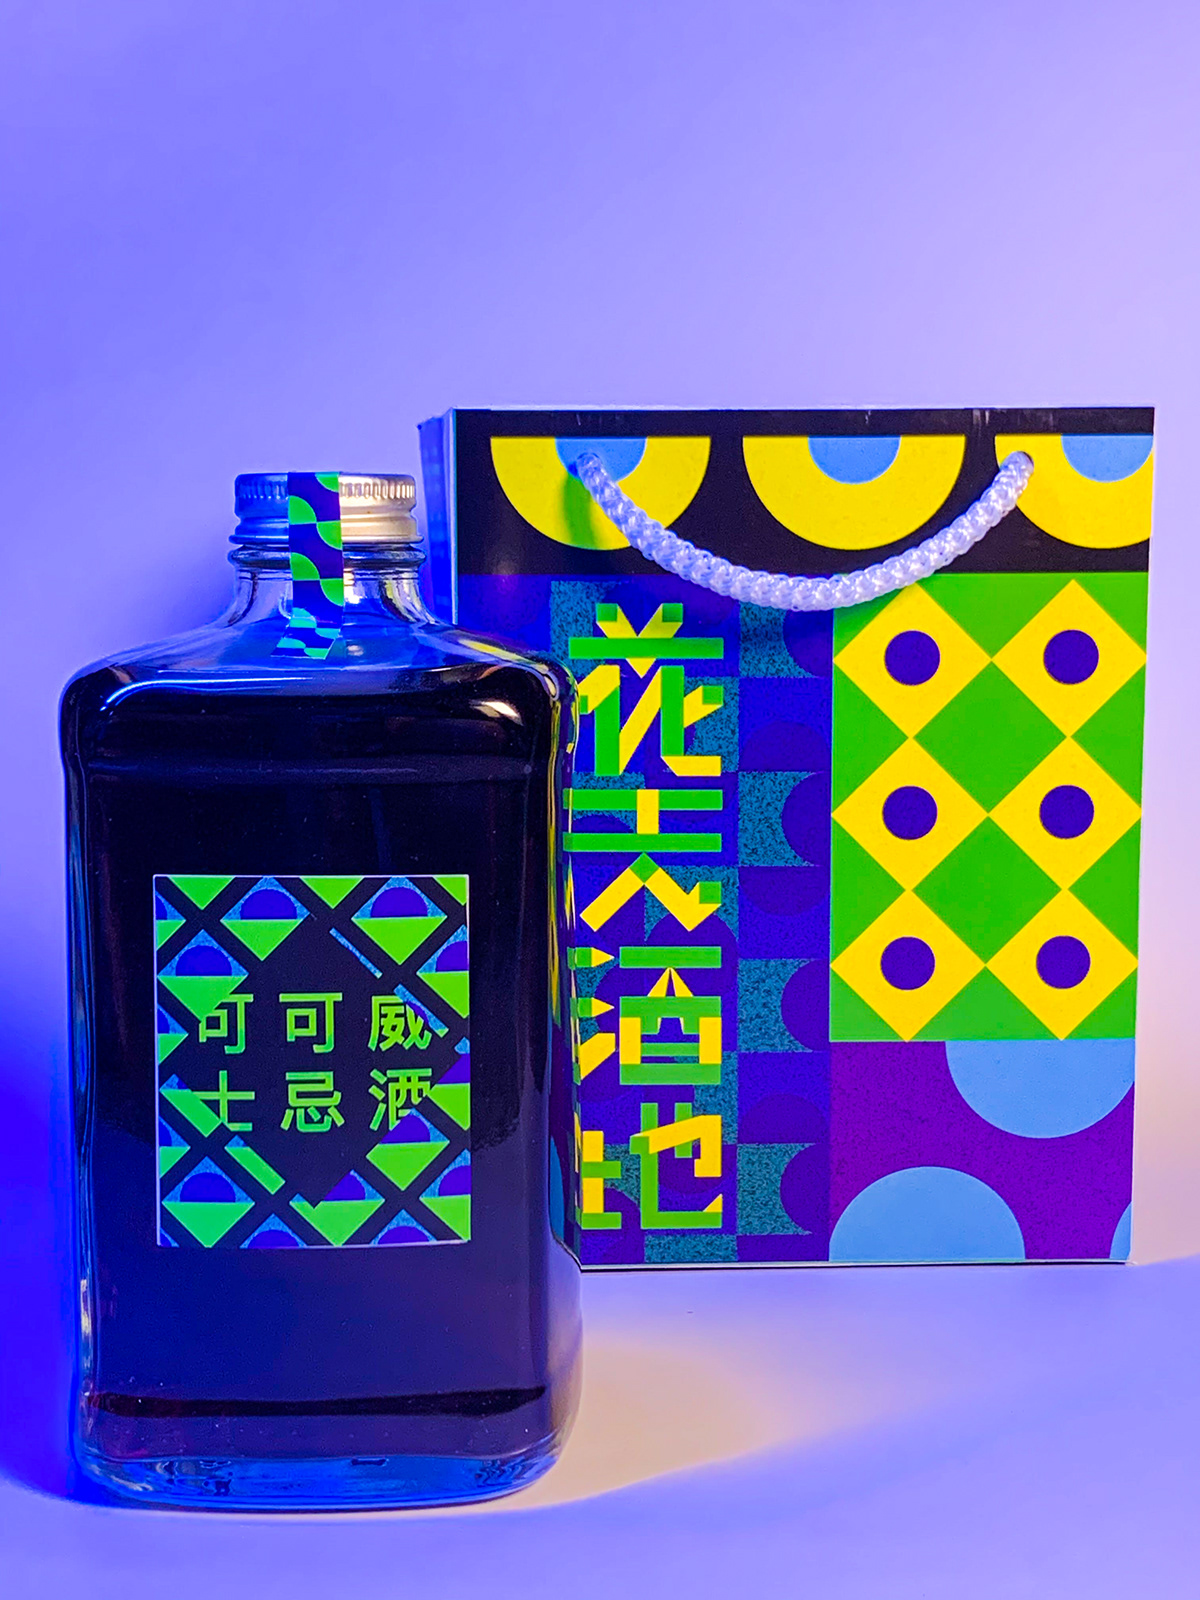 branding  Chinese typography design Packaging Patterns shapes symmetry